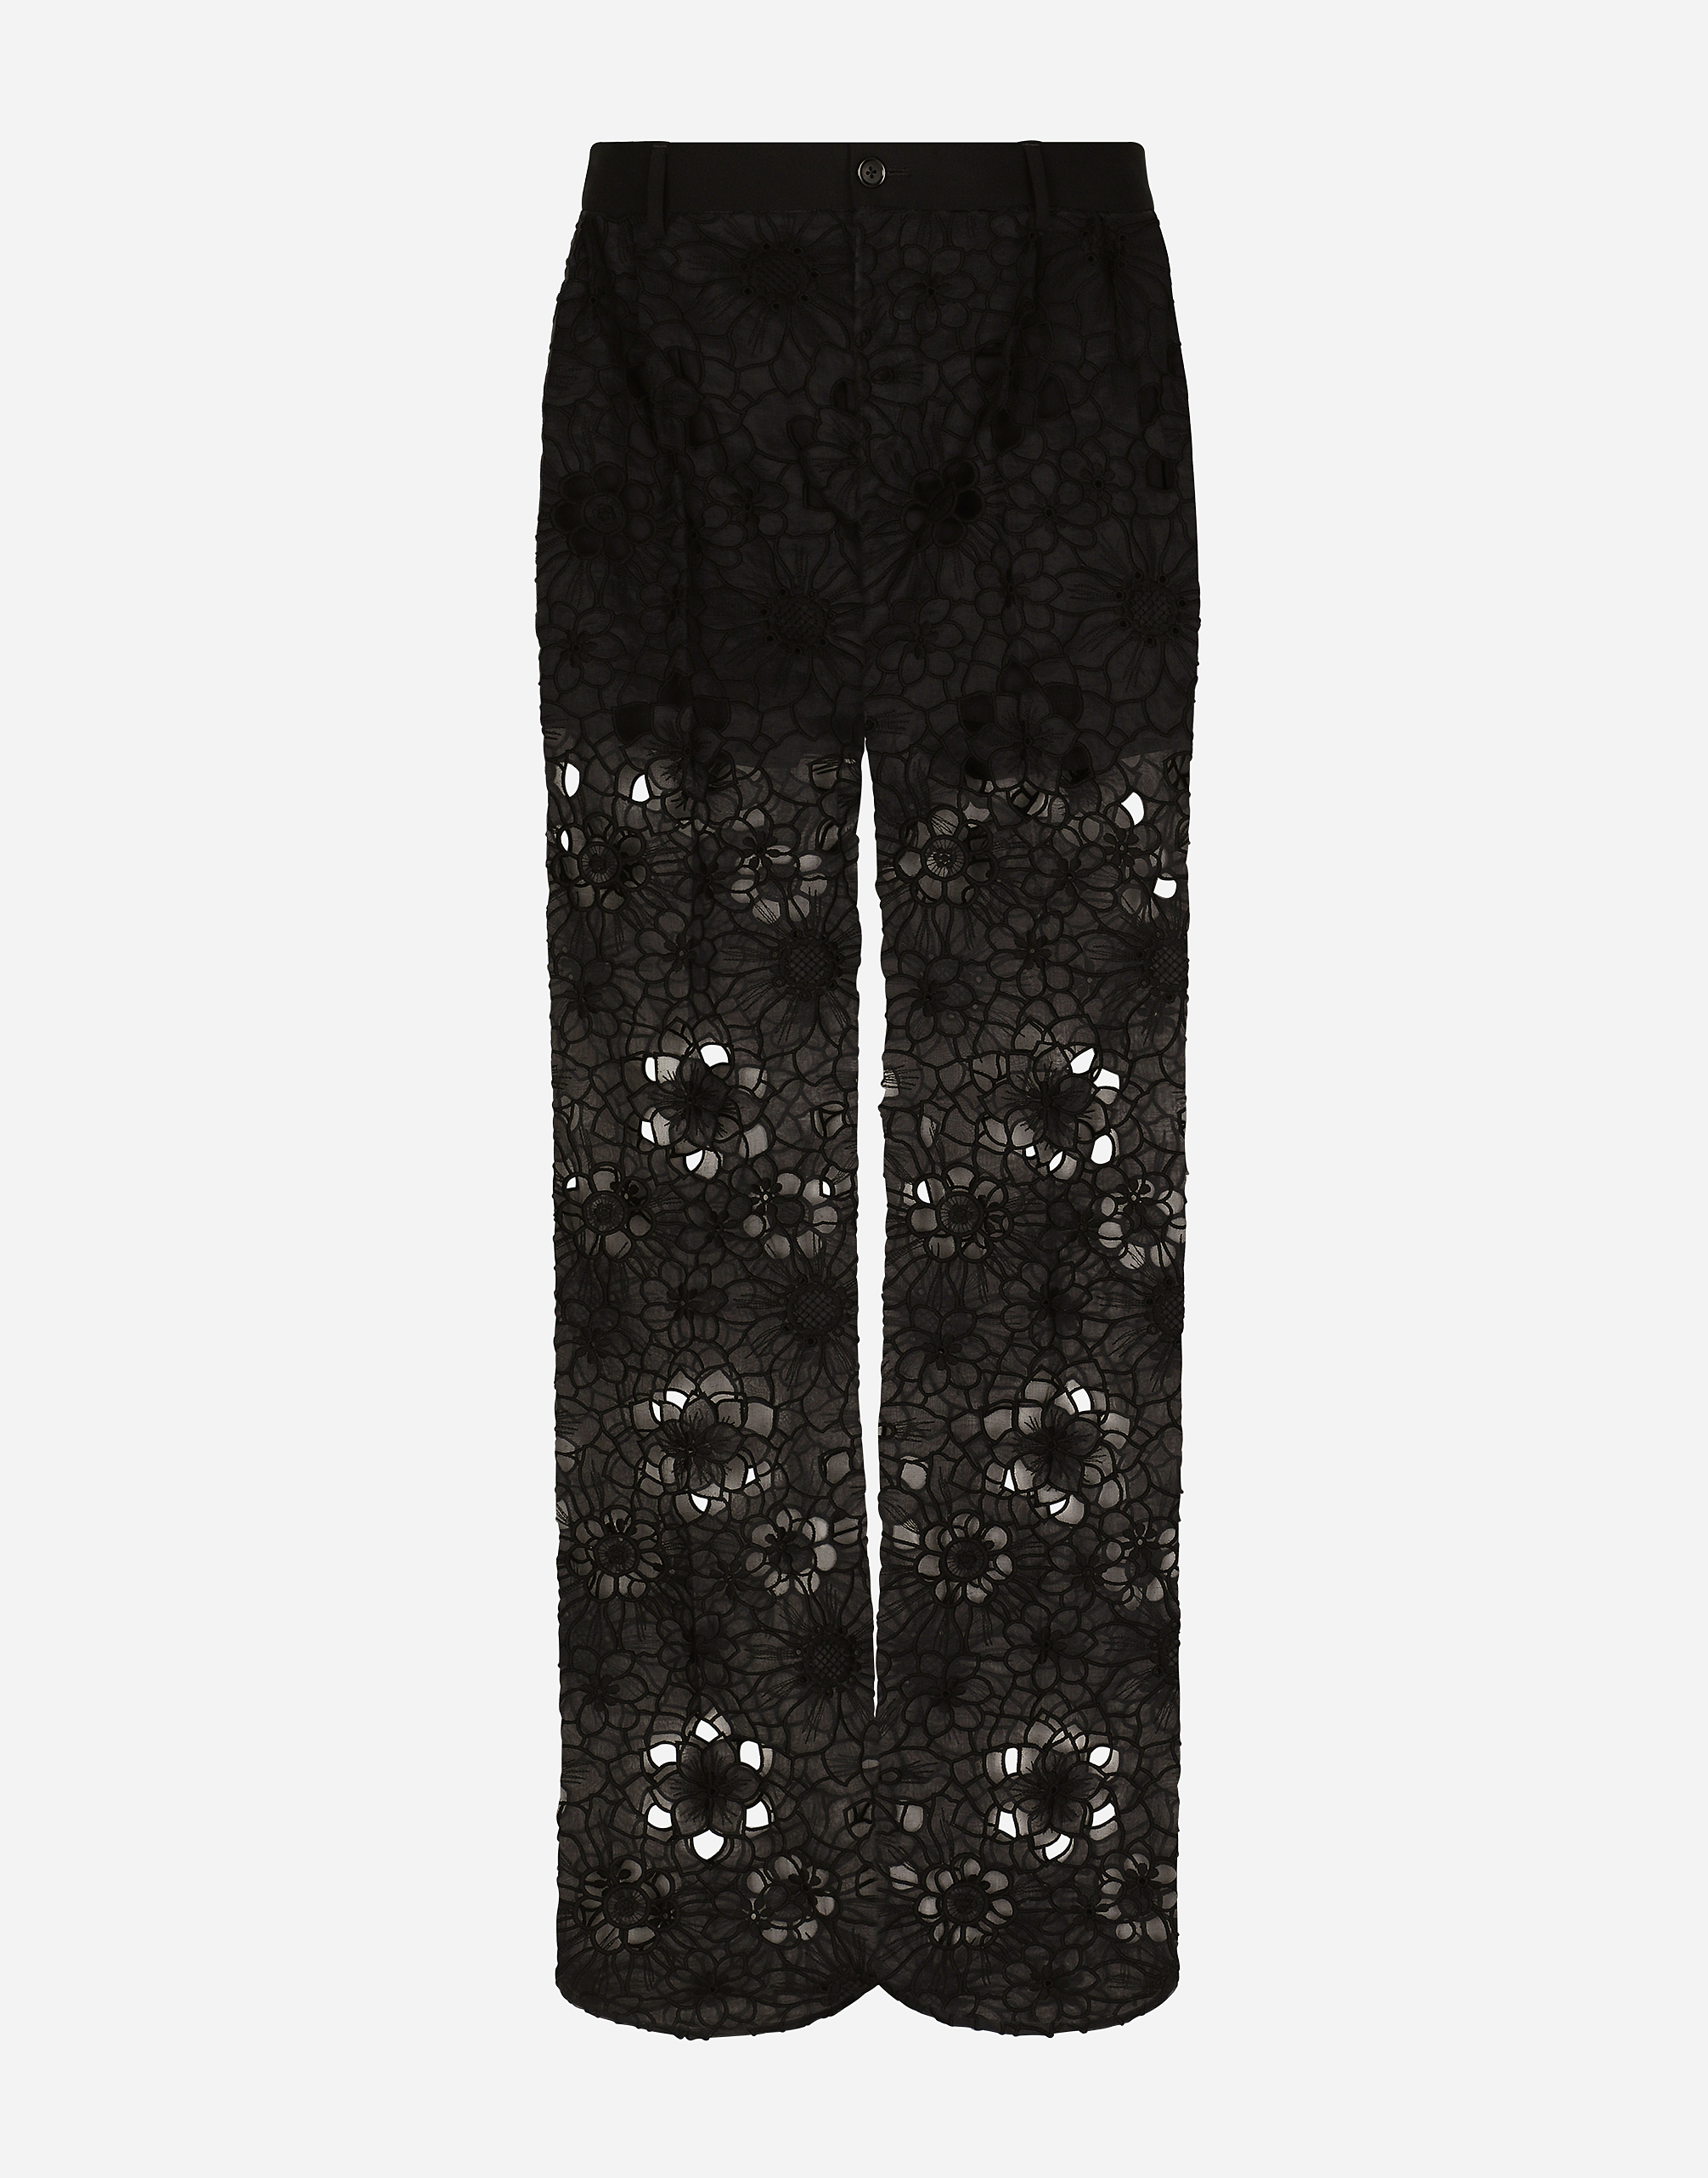 Tailored stretch broderie anglaise pants in Black